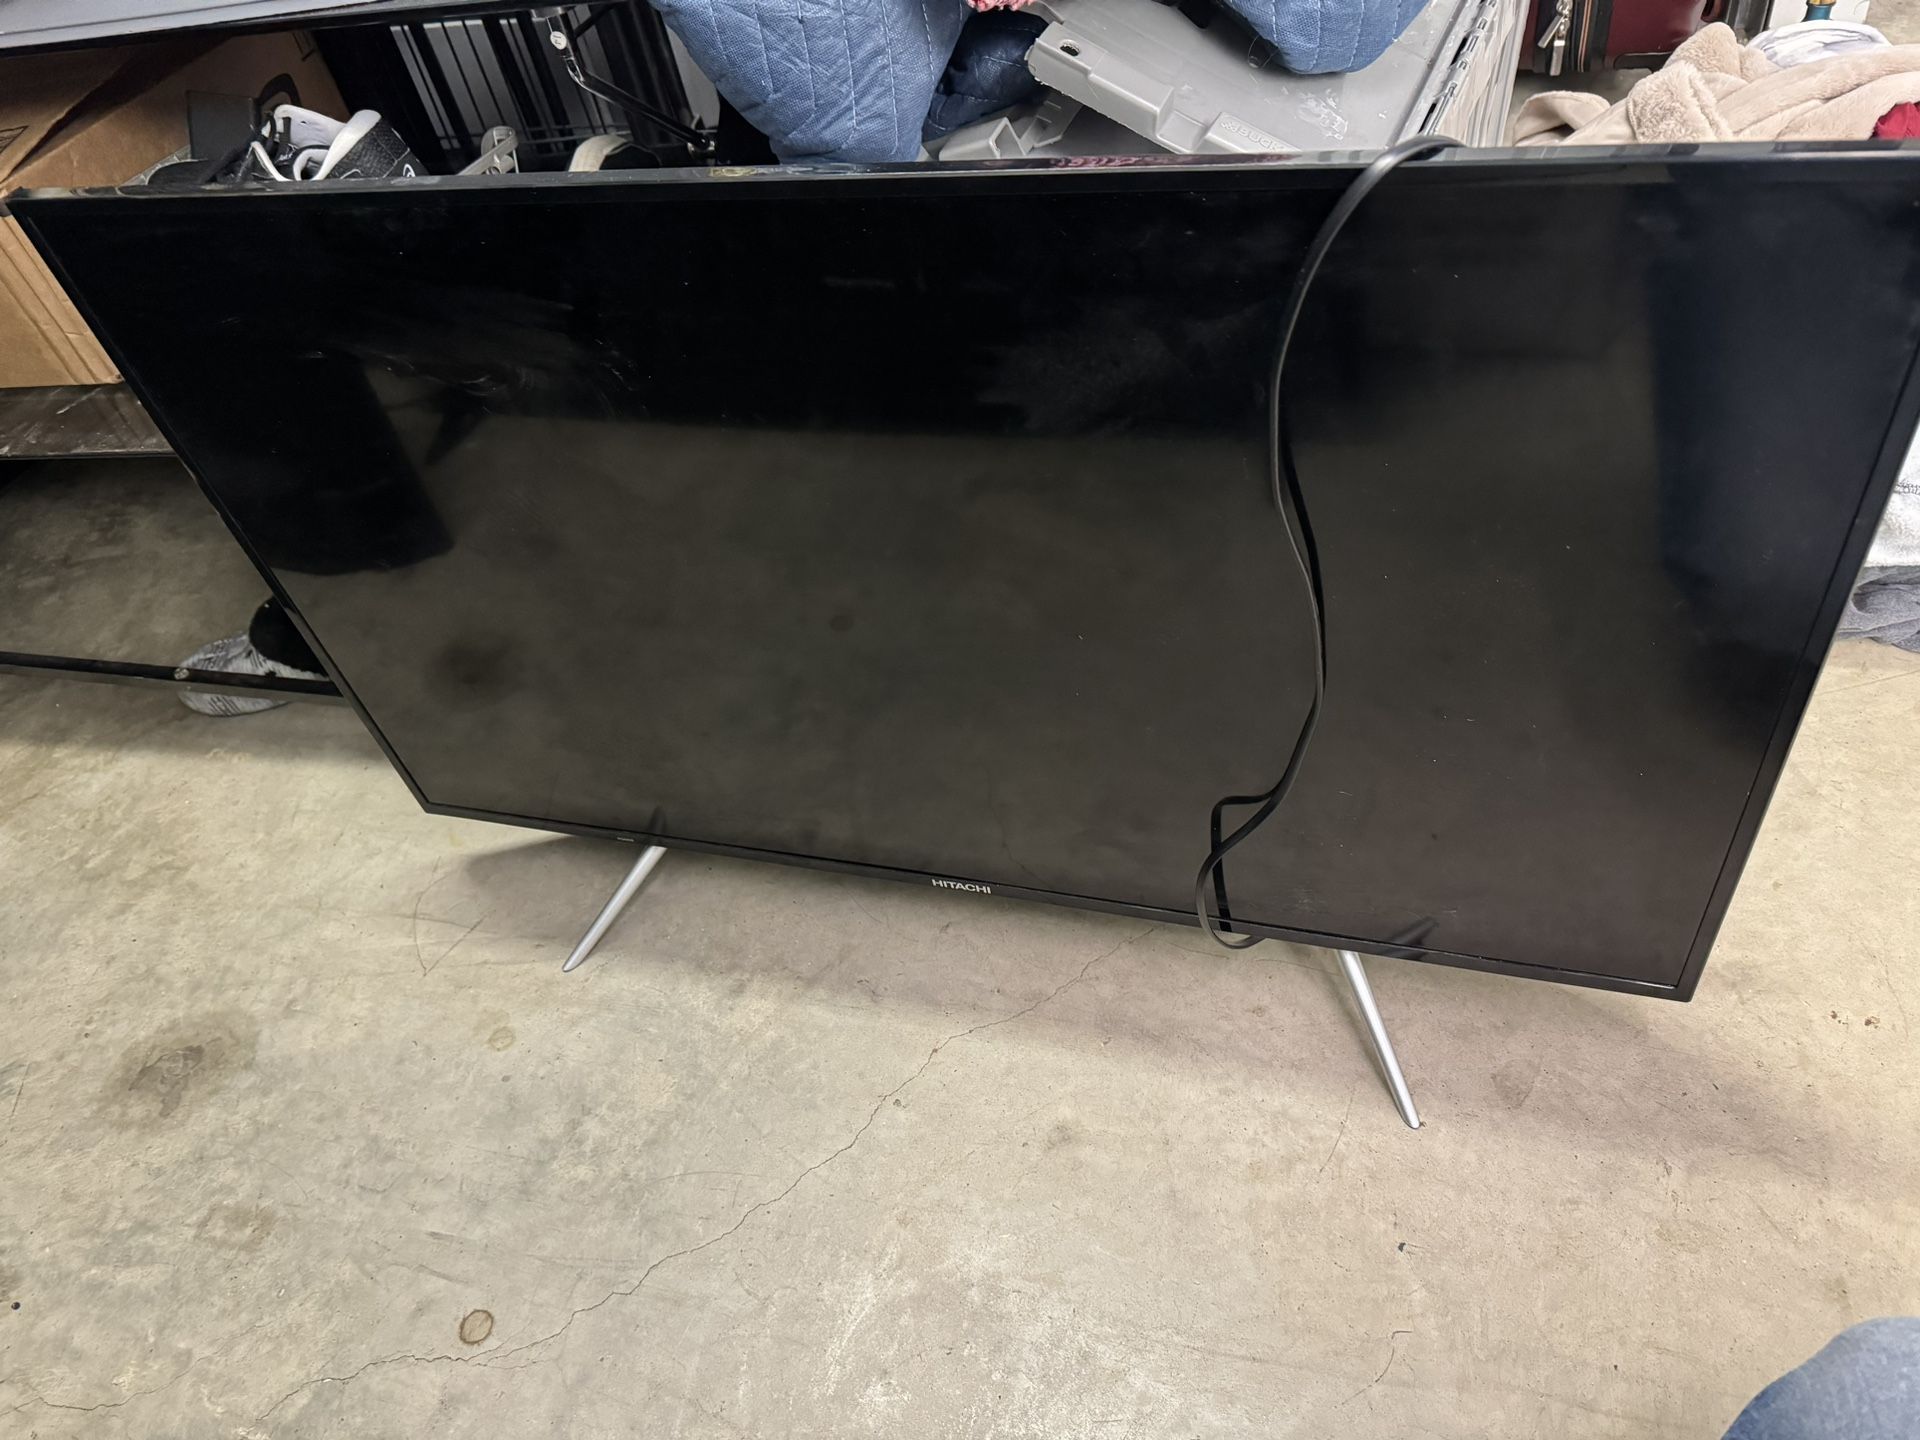 43” Tv For Sale